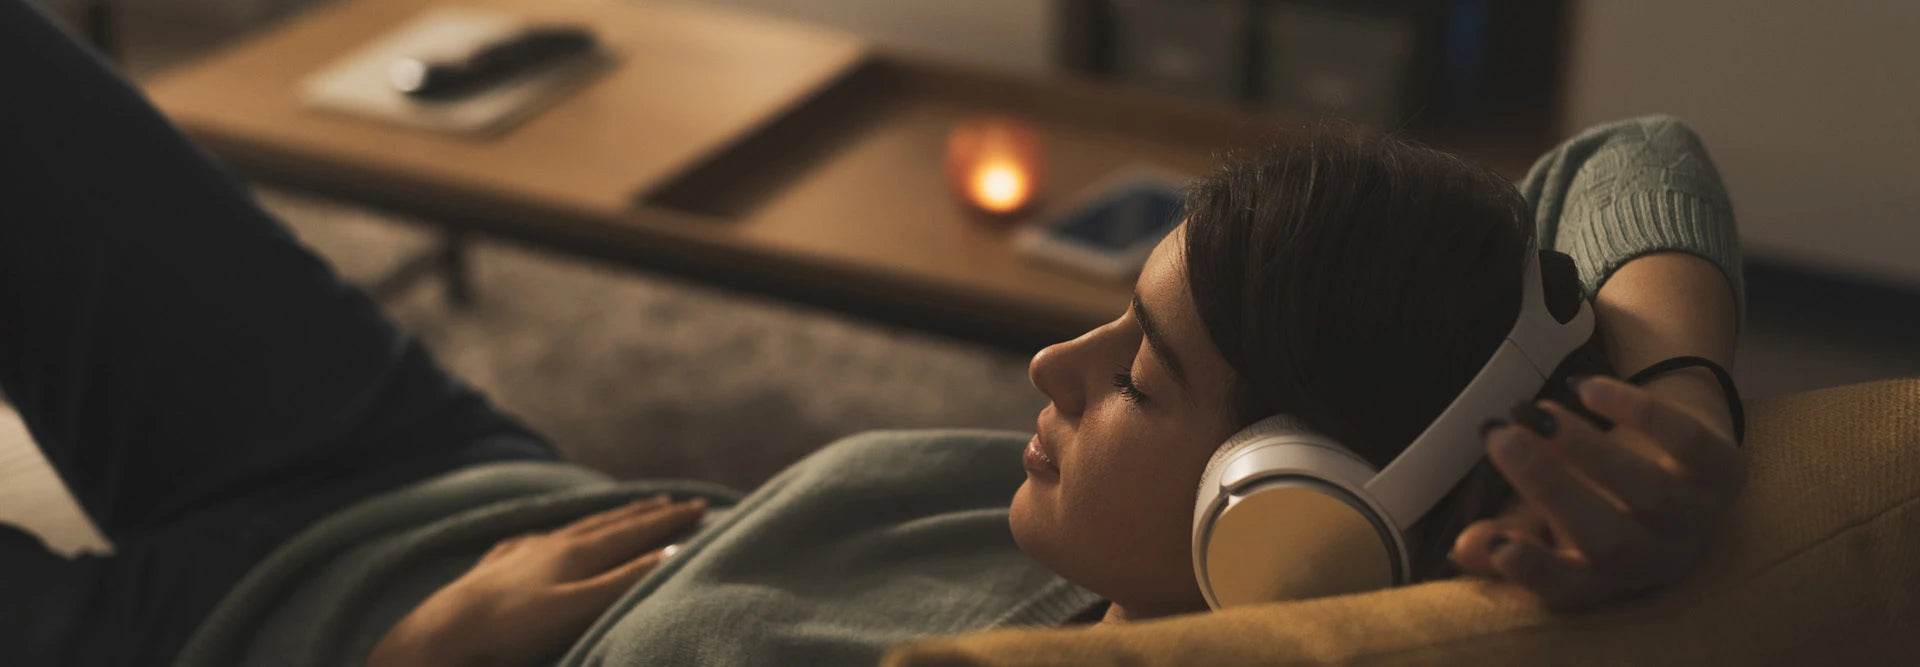 The best sounds for a blissful night’s sleep